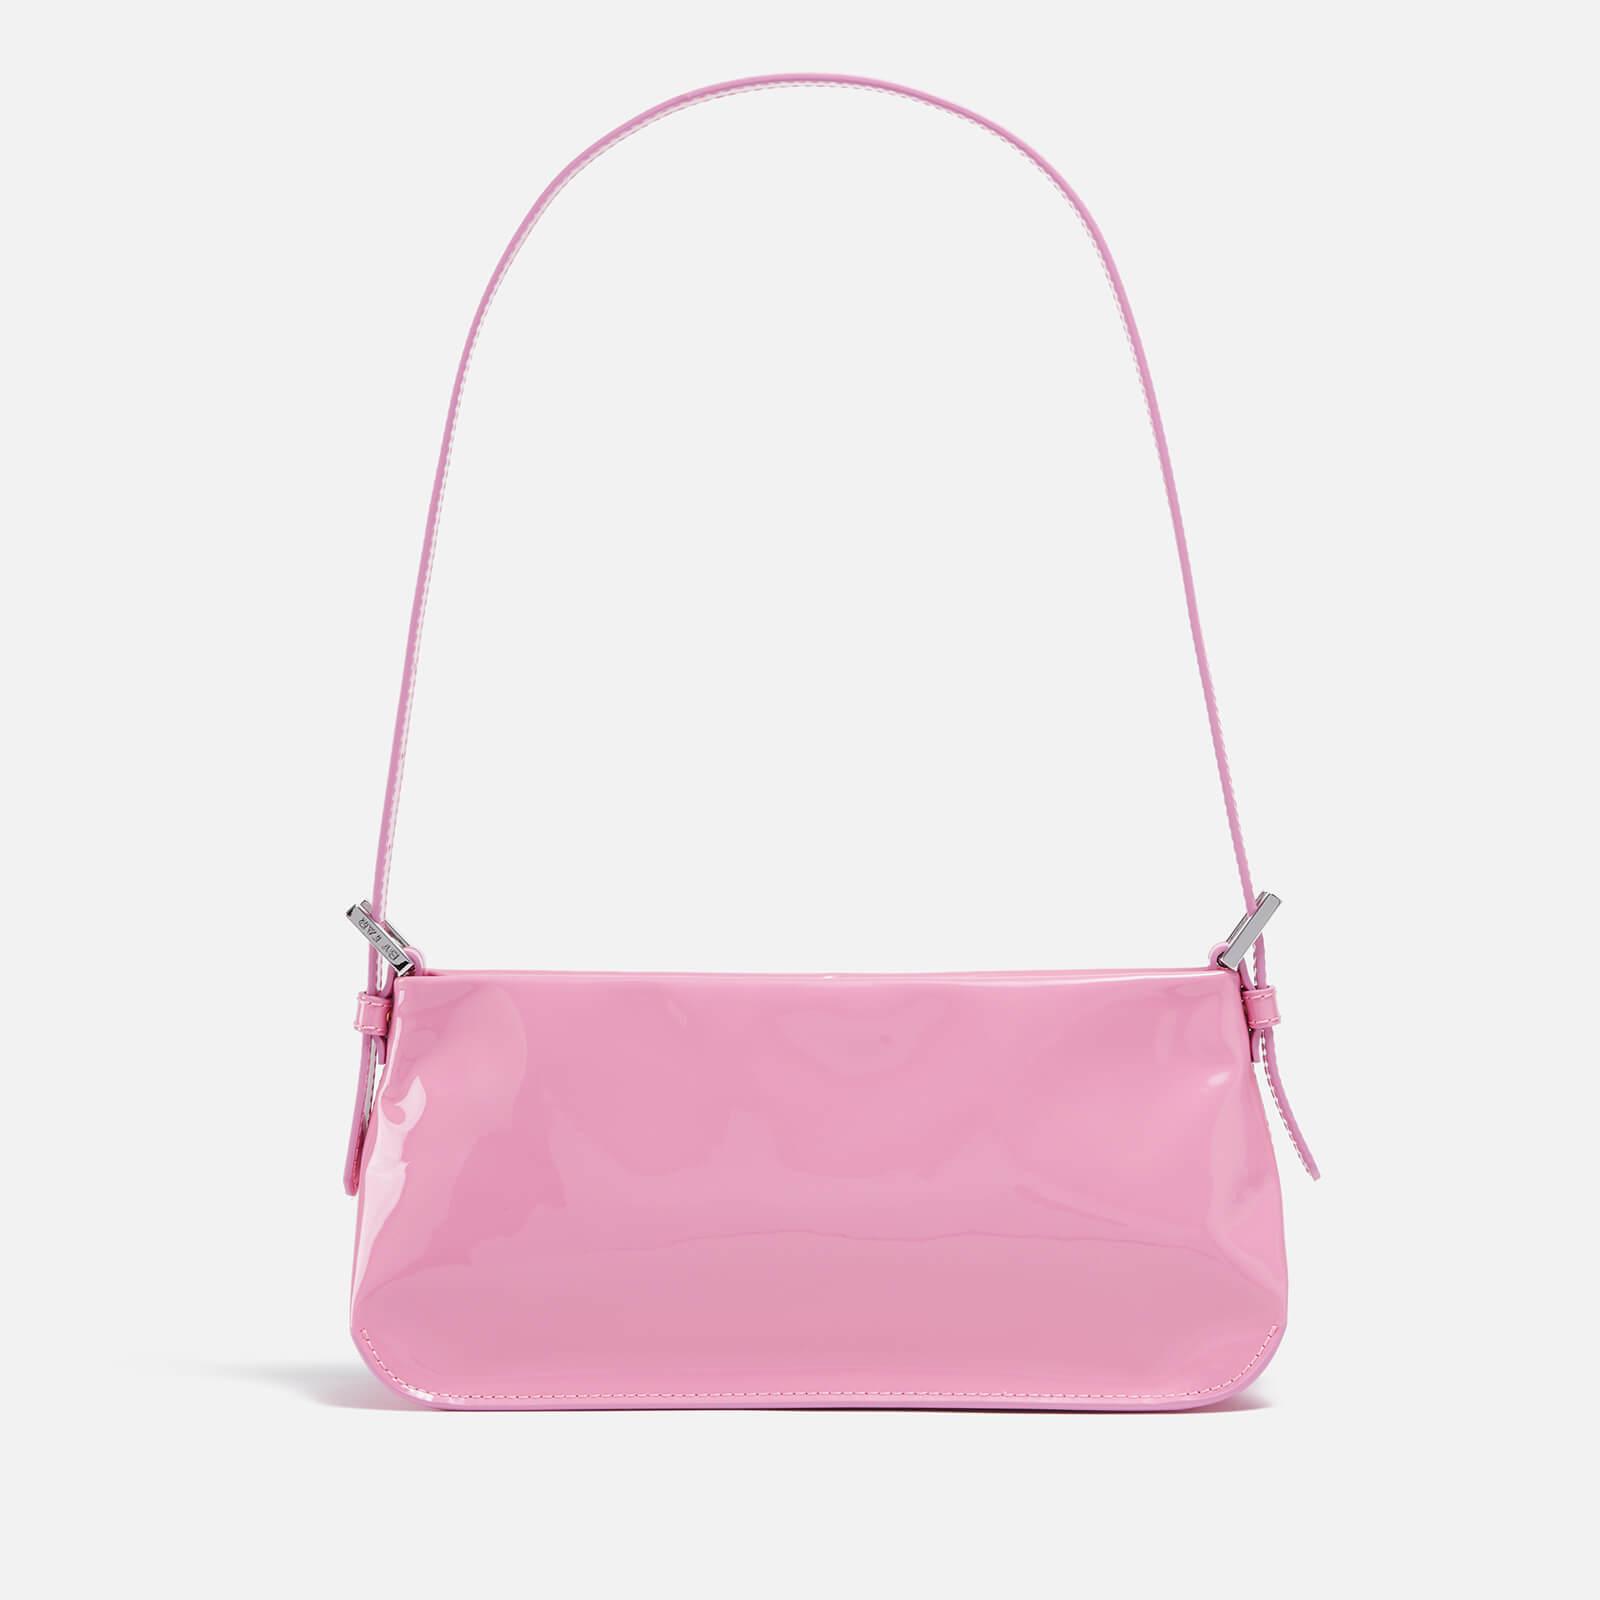 BY FAR Dulce Patent-leather Shoulder Bag in Pink | Lyst